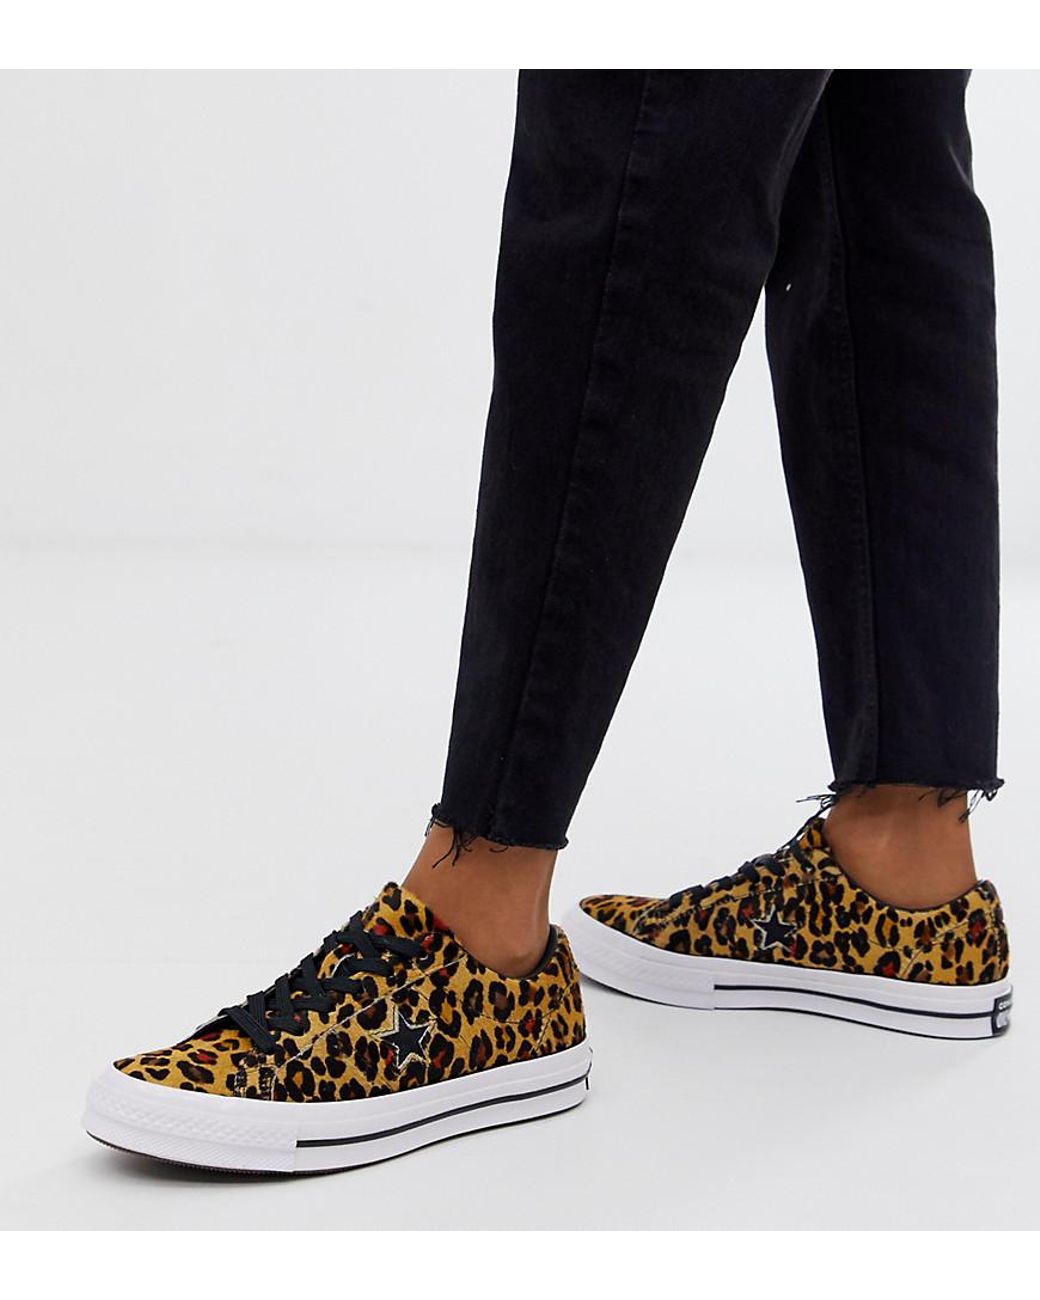 Converse Rubber One Star Pony Hair Leopard Print Trainers | Lyst